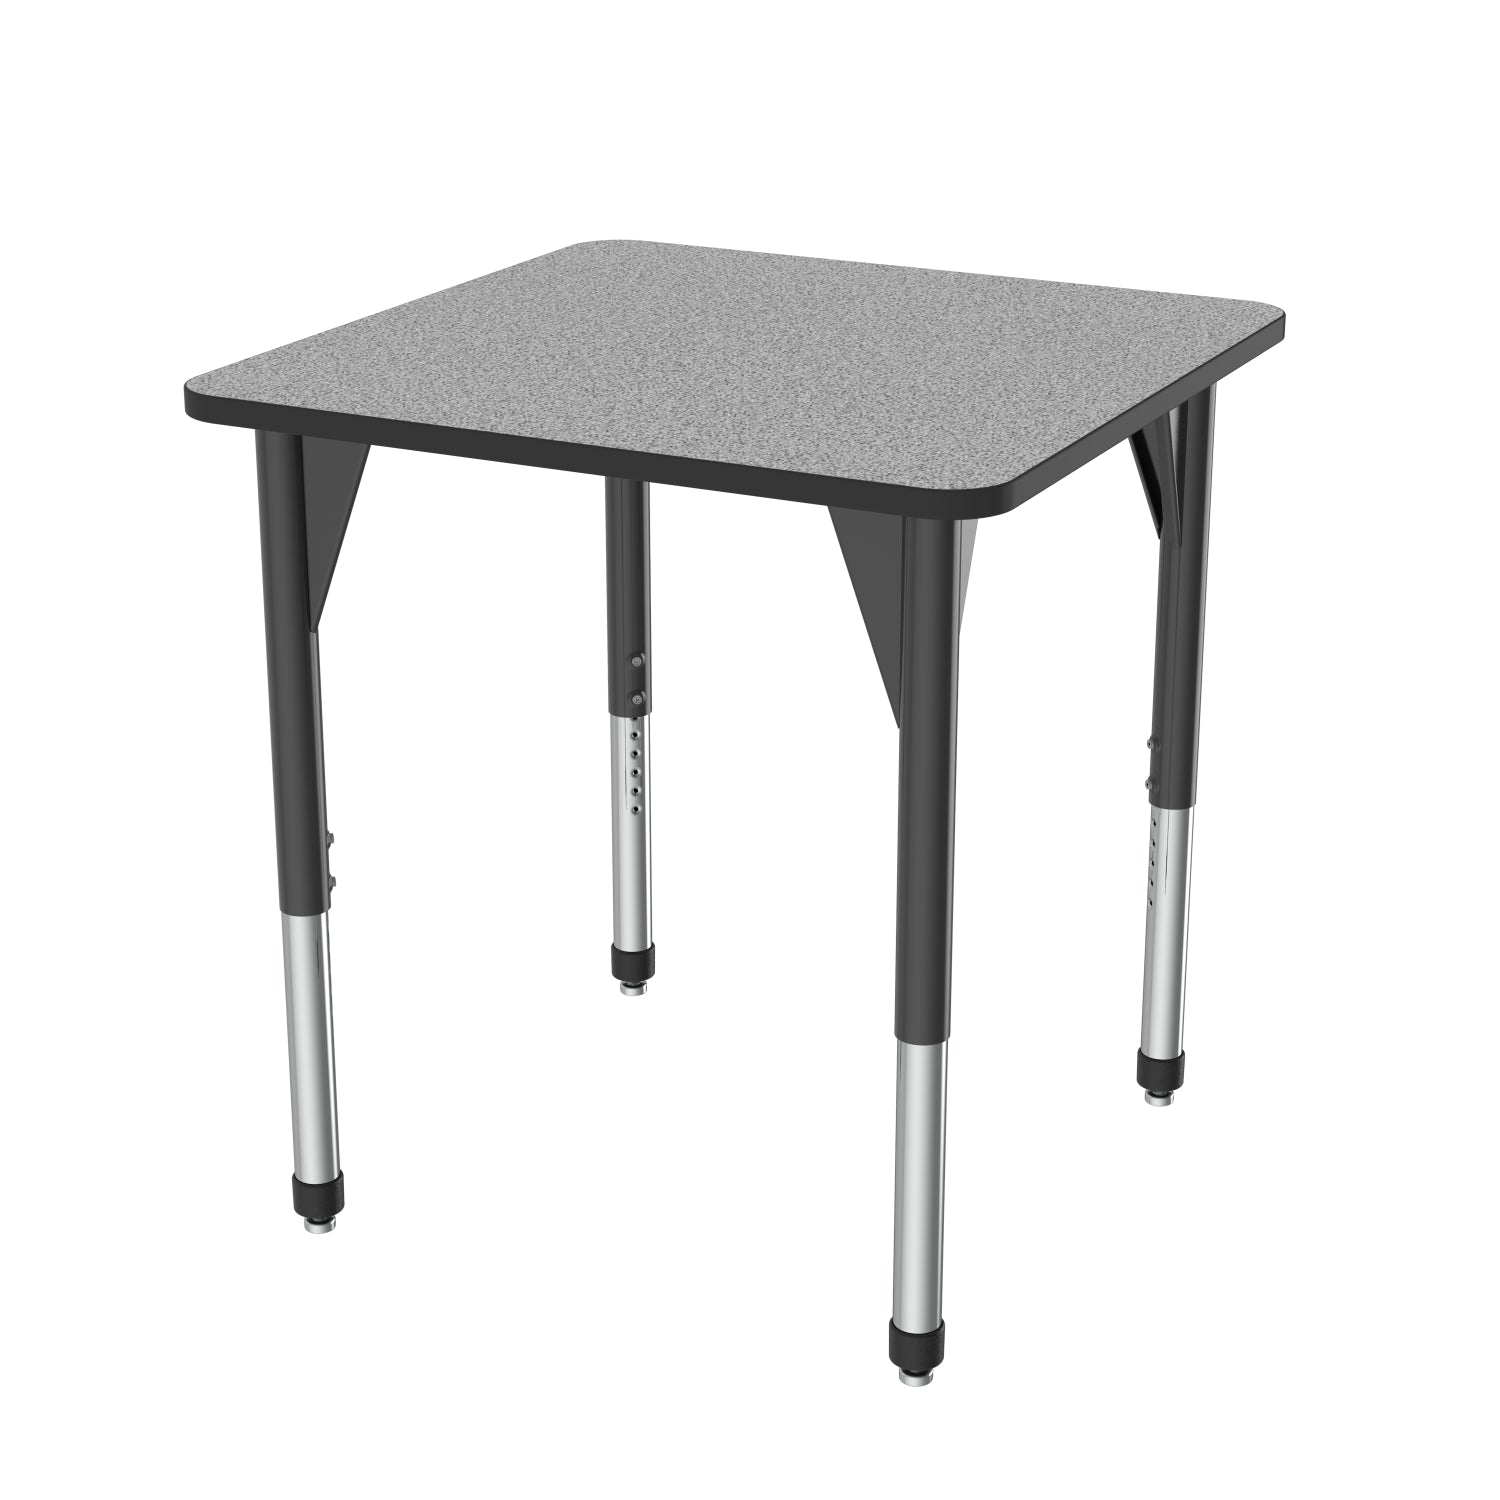 Premier Standing Height Collaborative Classroom Table, 36" Square